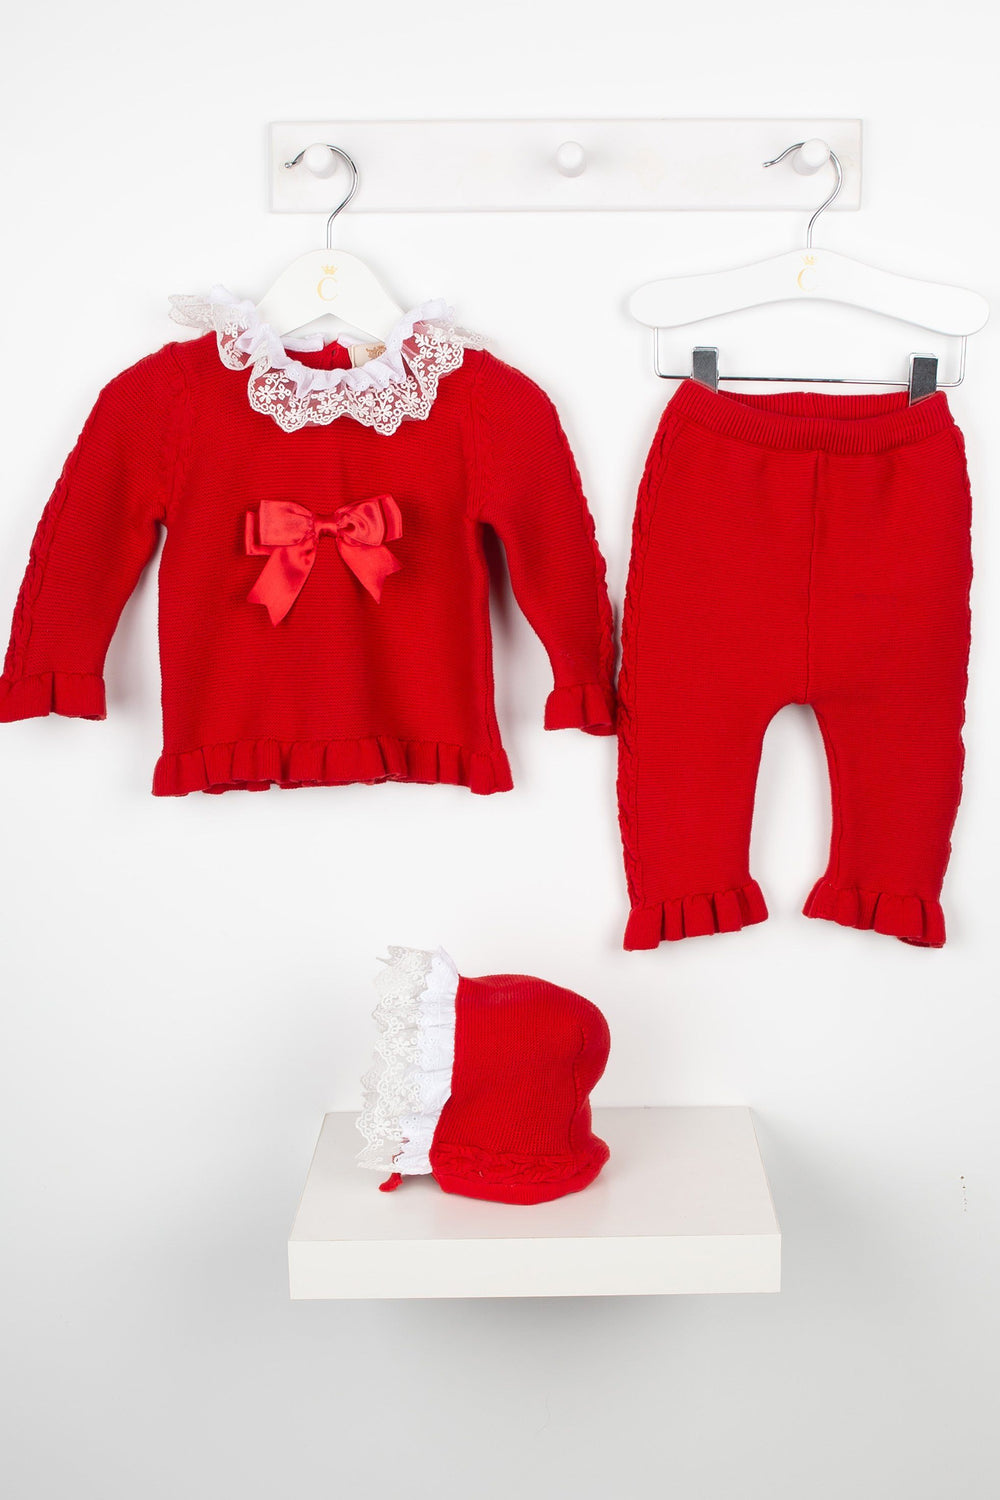 Caramelo Kids "Amara" Red Knitted Top & Trousers | Millie and John